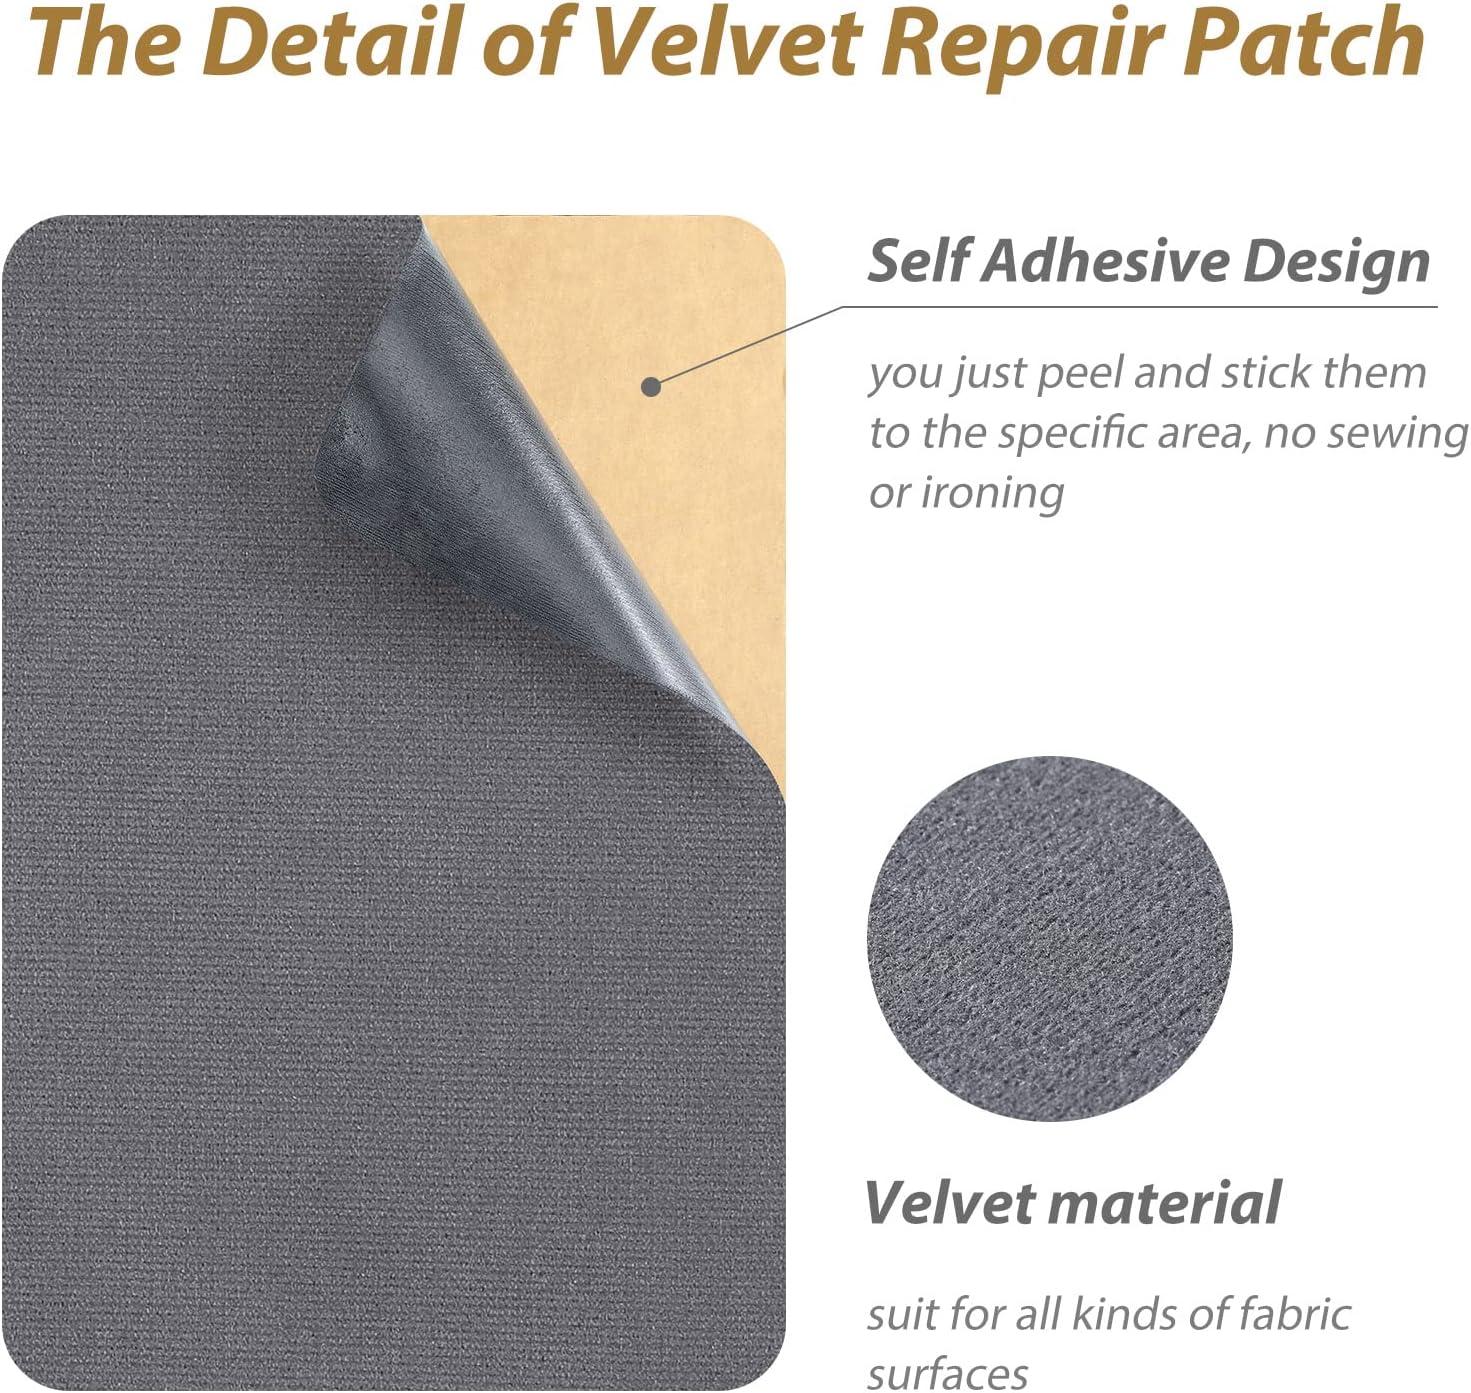 6 Pieces Upholstery Patch Sofa Couch Carpet Scratches Patch Velvet Repair  Patch Self Adhesive Flannel Fabric Patch for Furniture Car Seats Jeans Hand  Bag Jackets, 11.81 x 7.87 Inch (Gray)